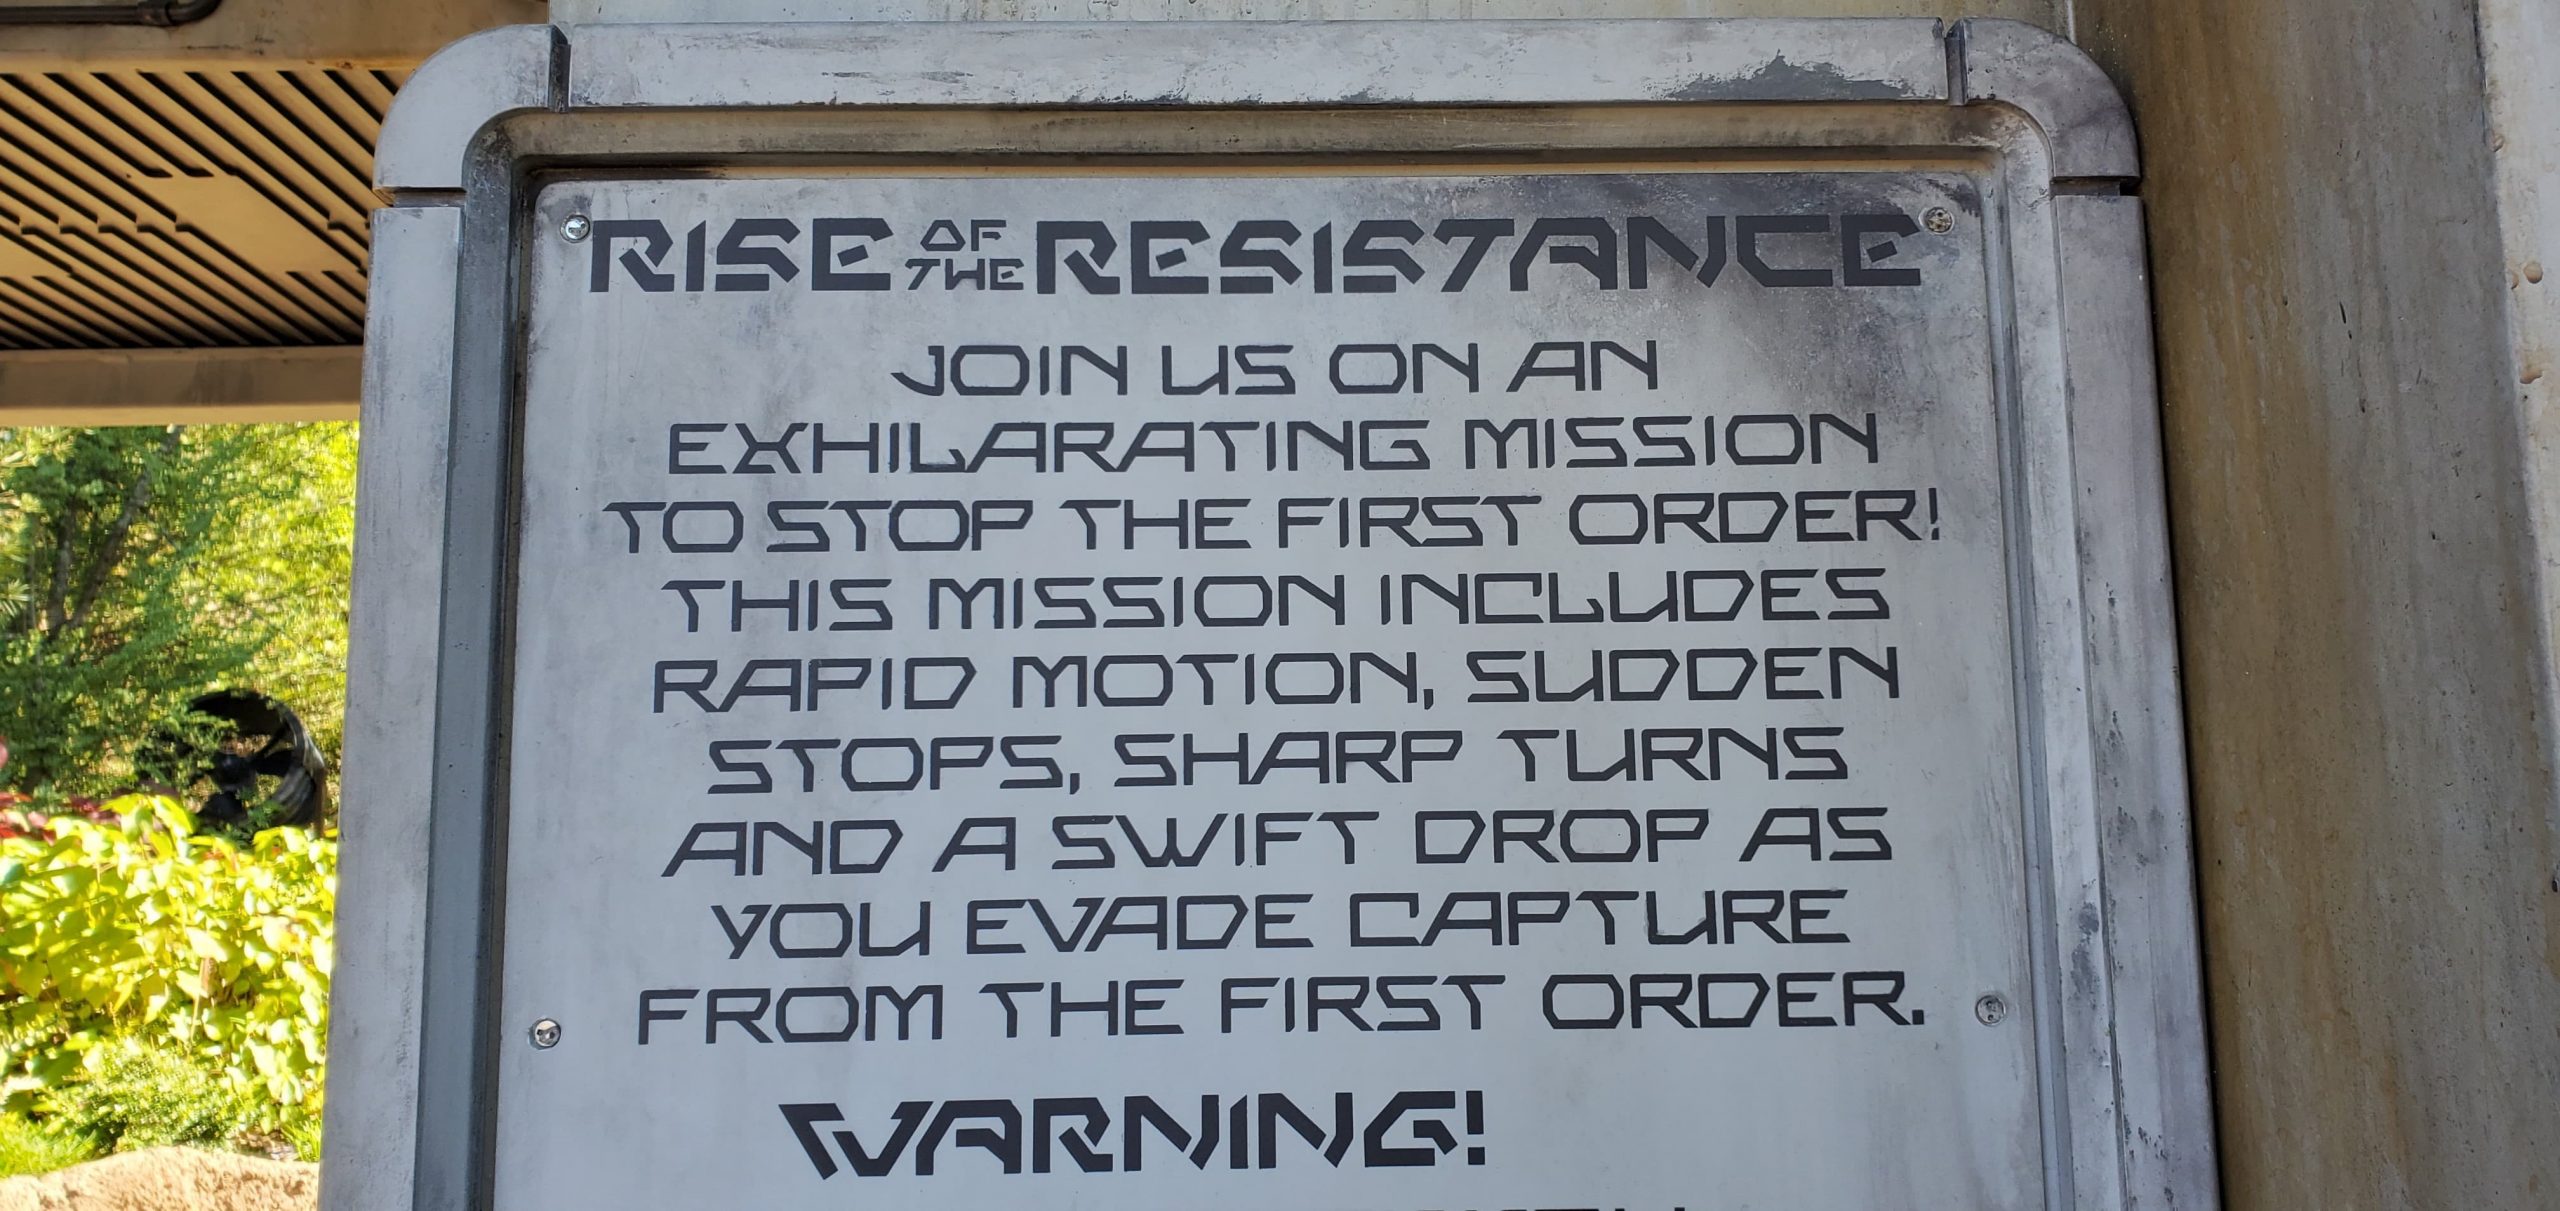 Know Before You Go: Restrictions for Rise of the Resistance Attraction